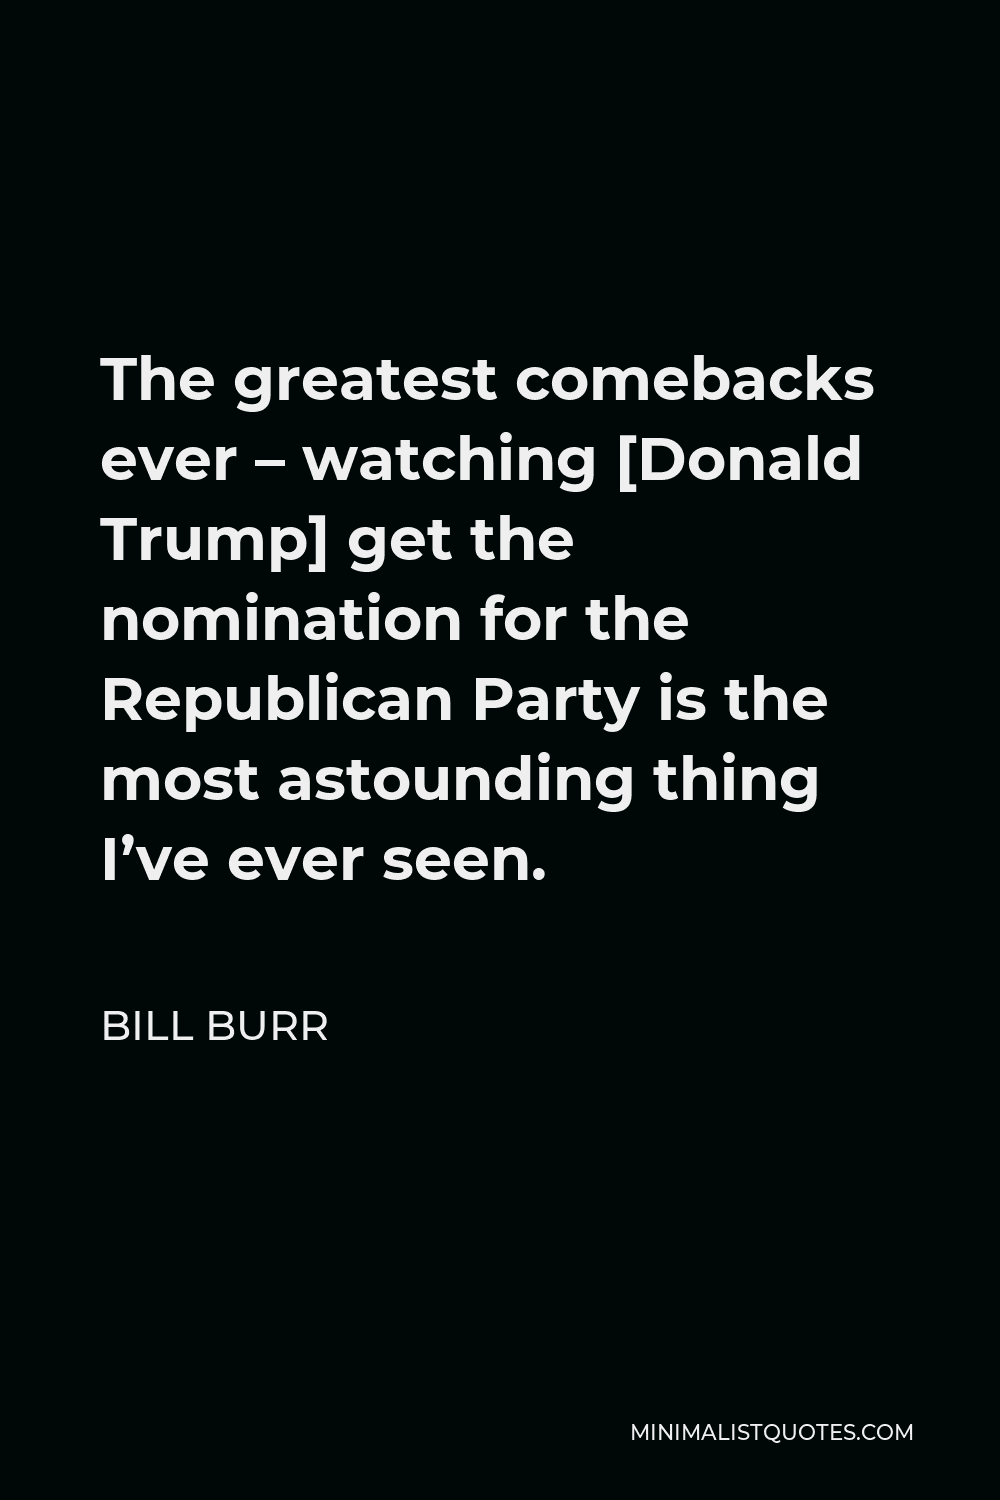 Bill Burr Quote - The greatest comebacks ever – watching [Donald Trump] get the nomination for the Republican Party is the most astounding thing I’ve ever seen.